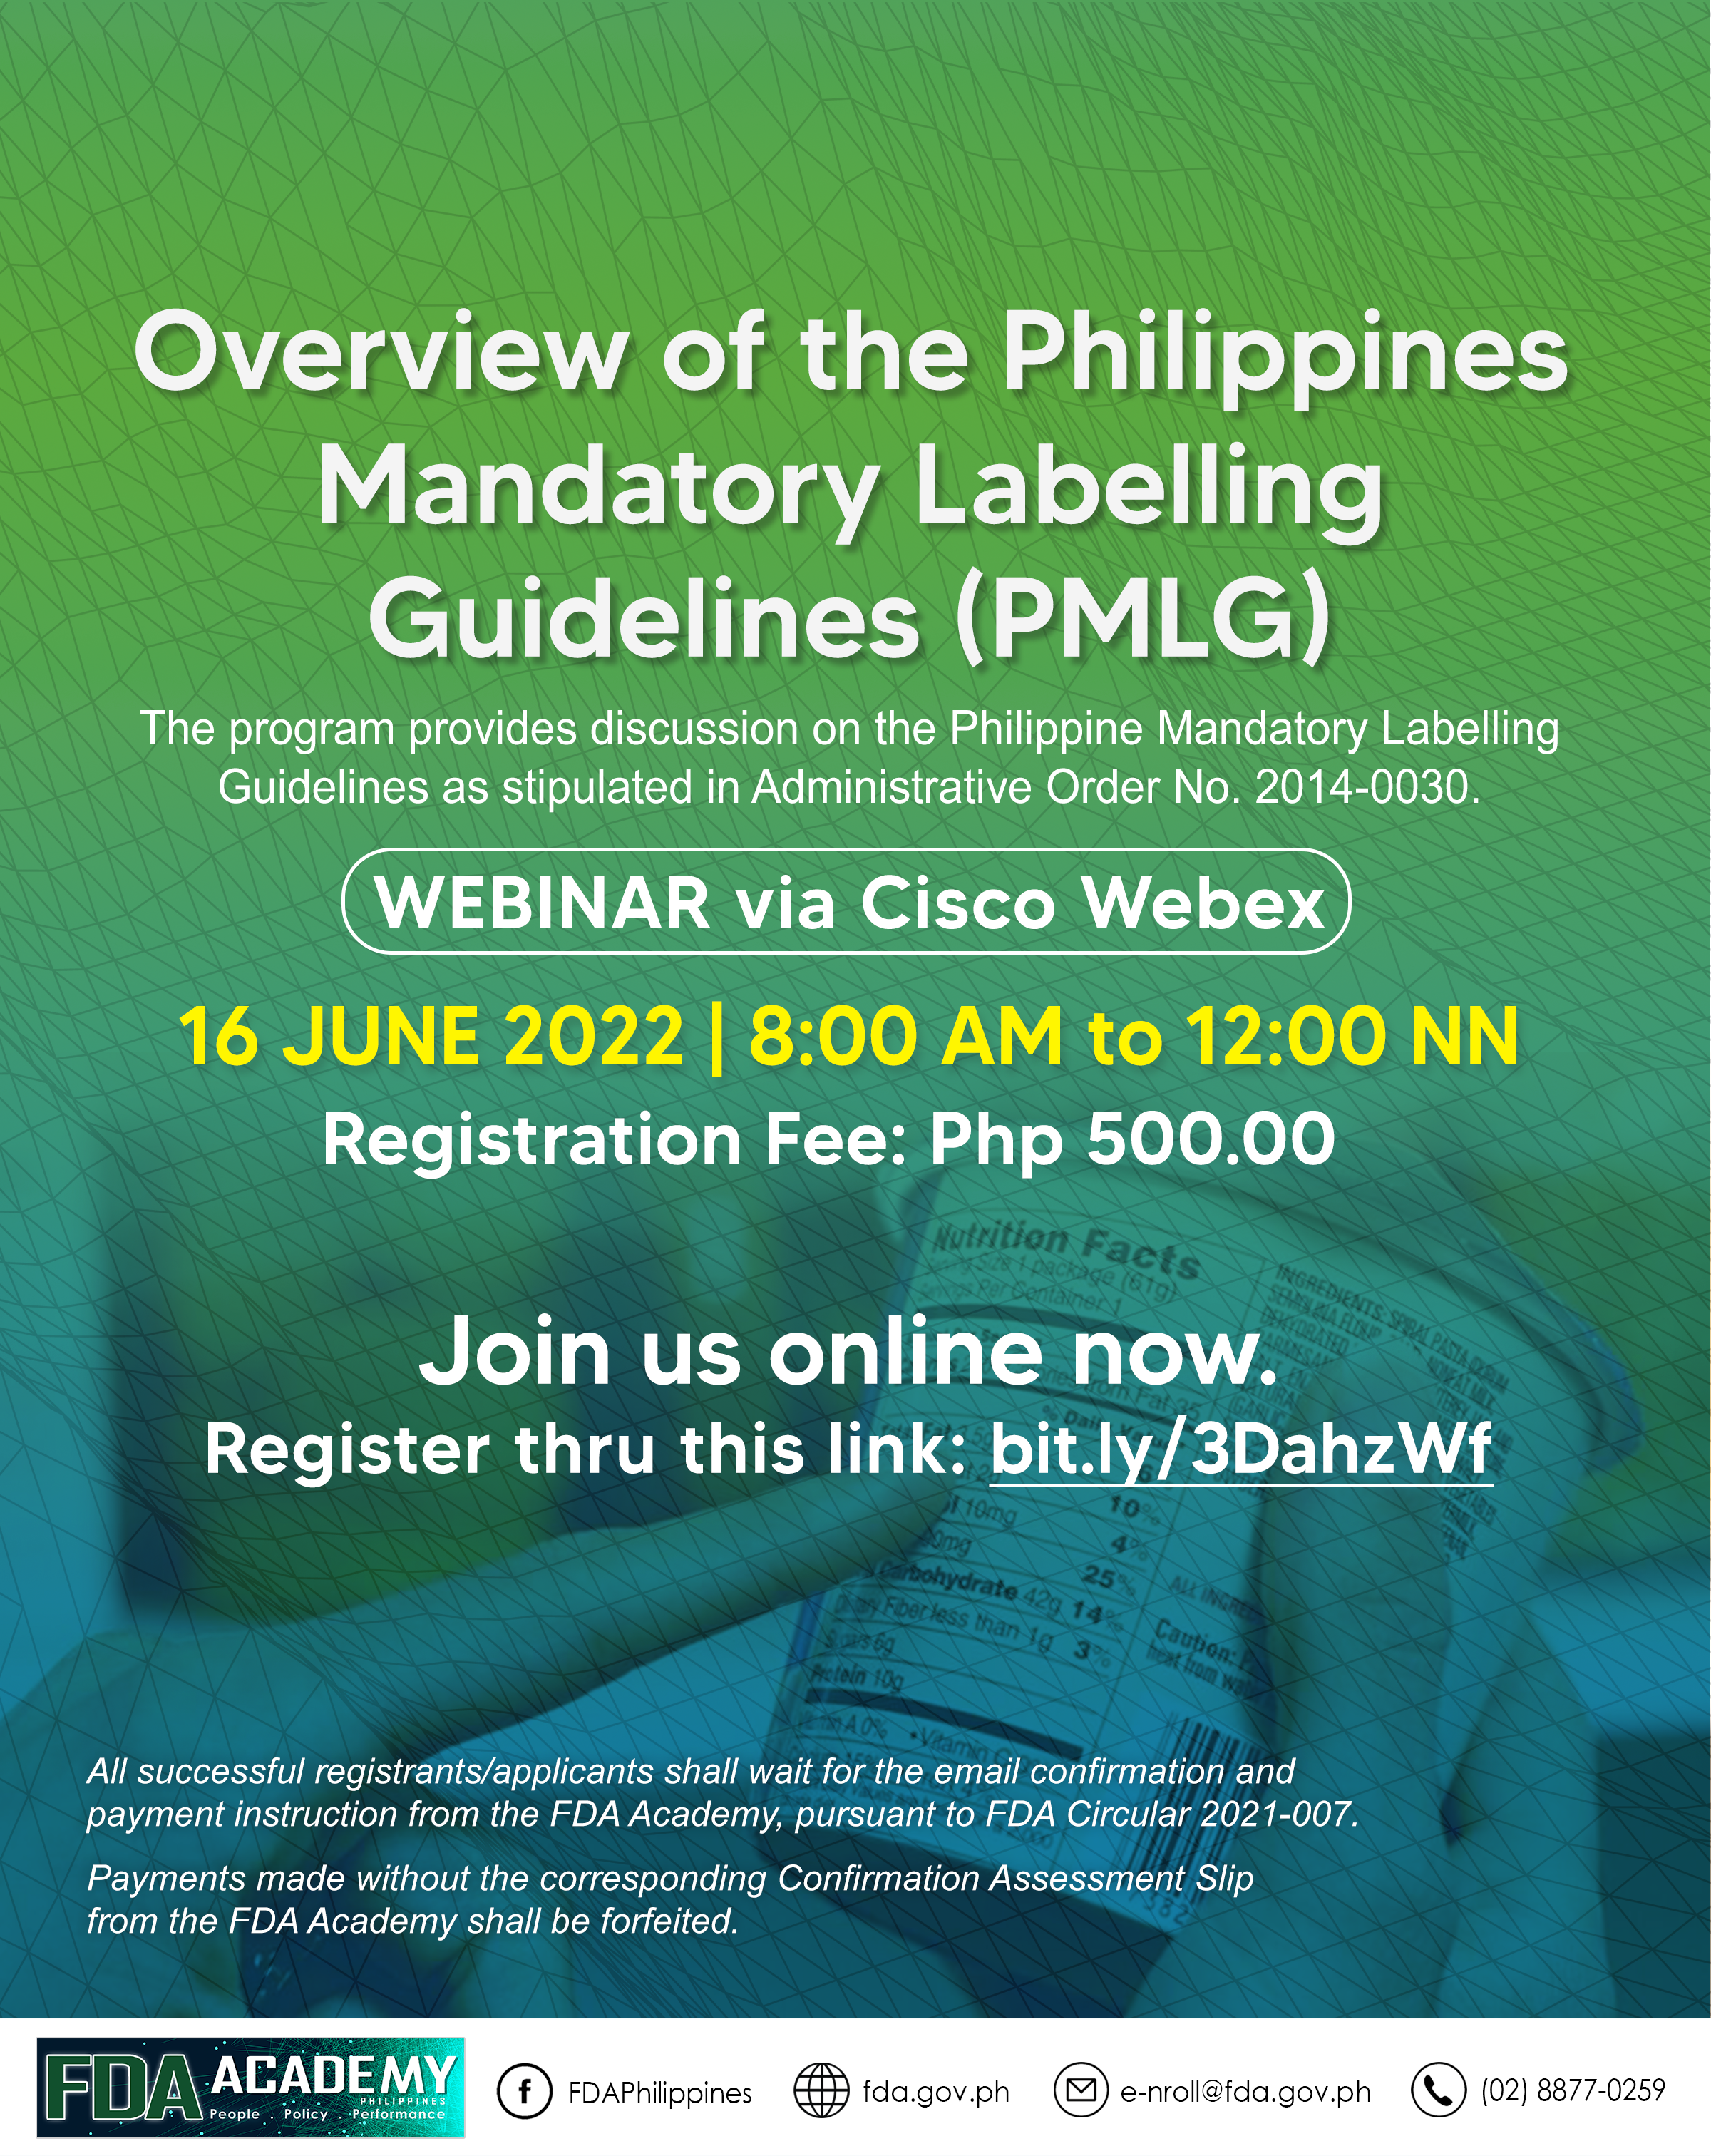 Announcement || OVERVIEW OF THE PHILIPPINE MANDATORY LABELLING GUIDELINES (PMLG)